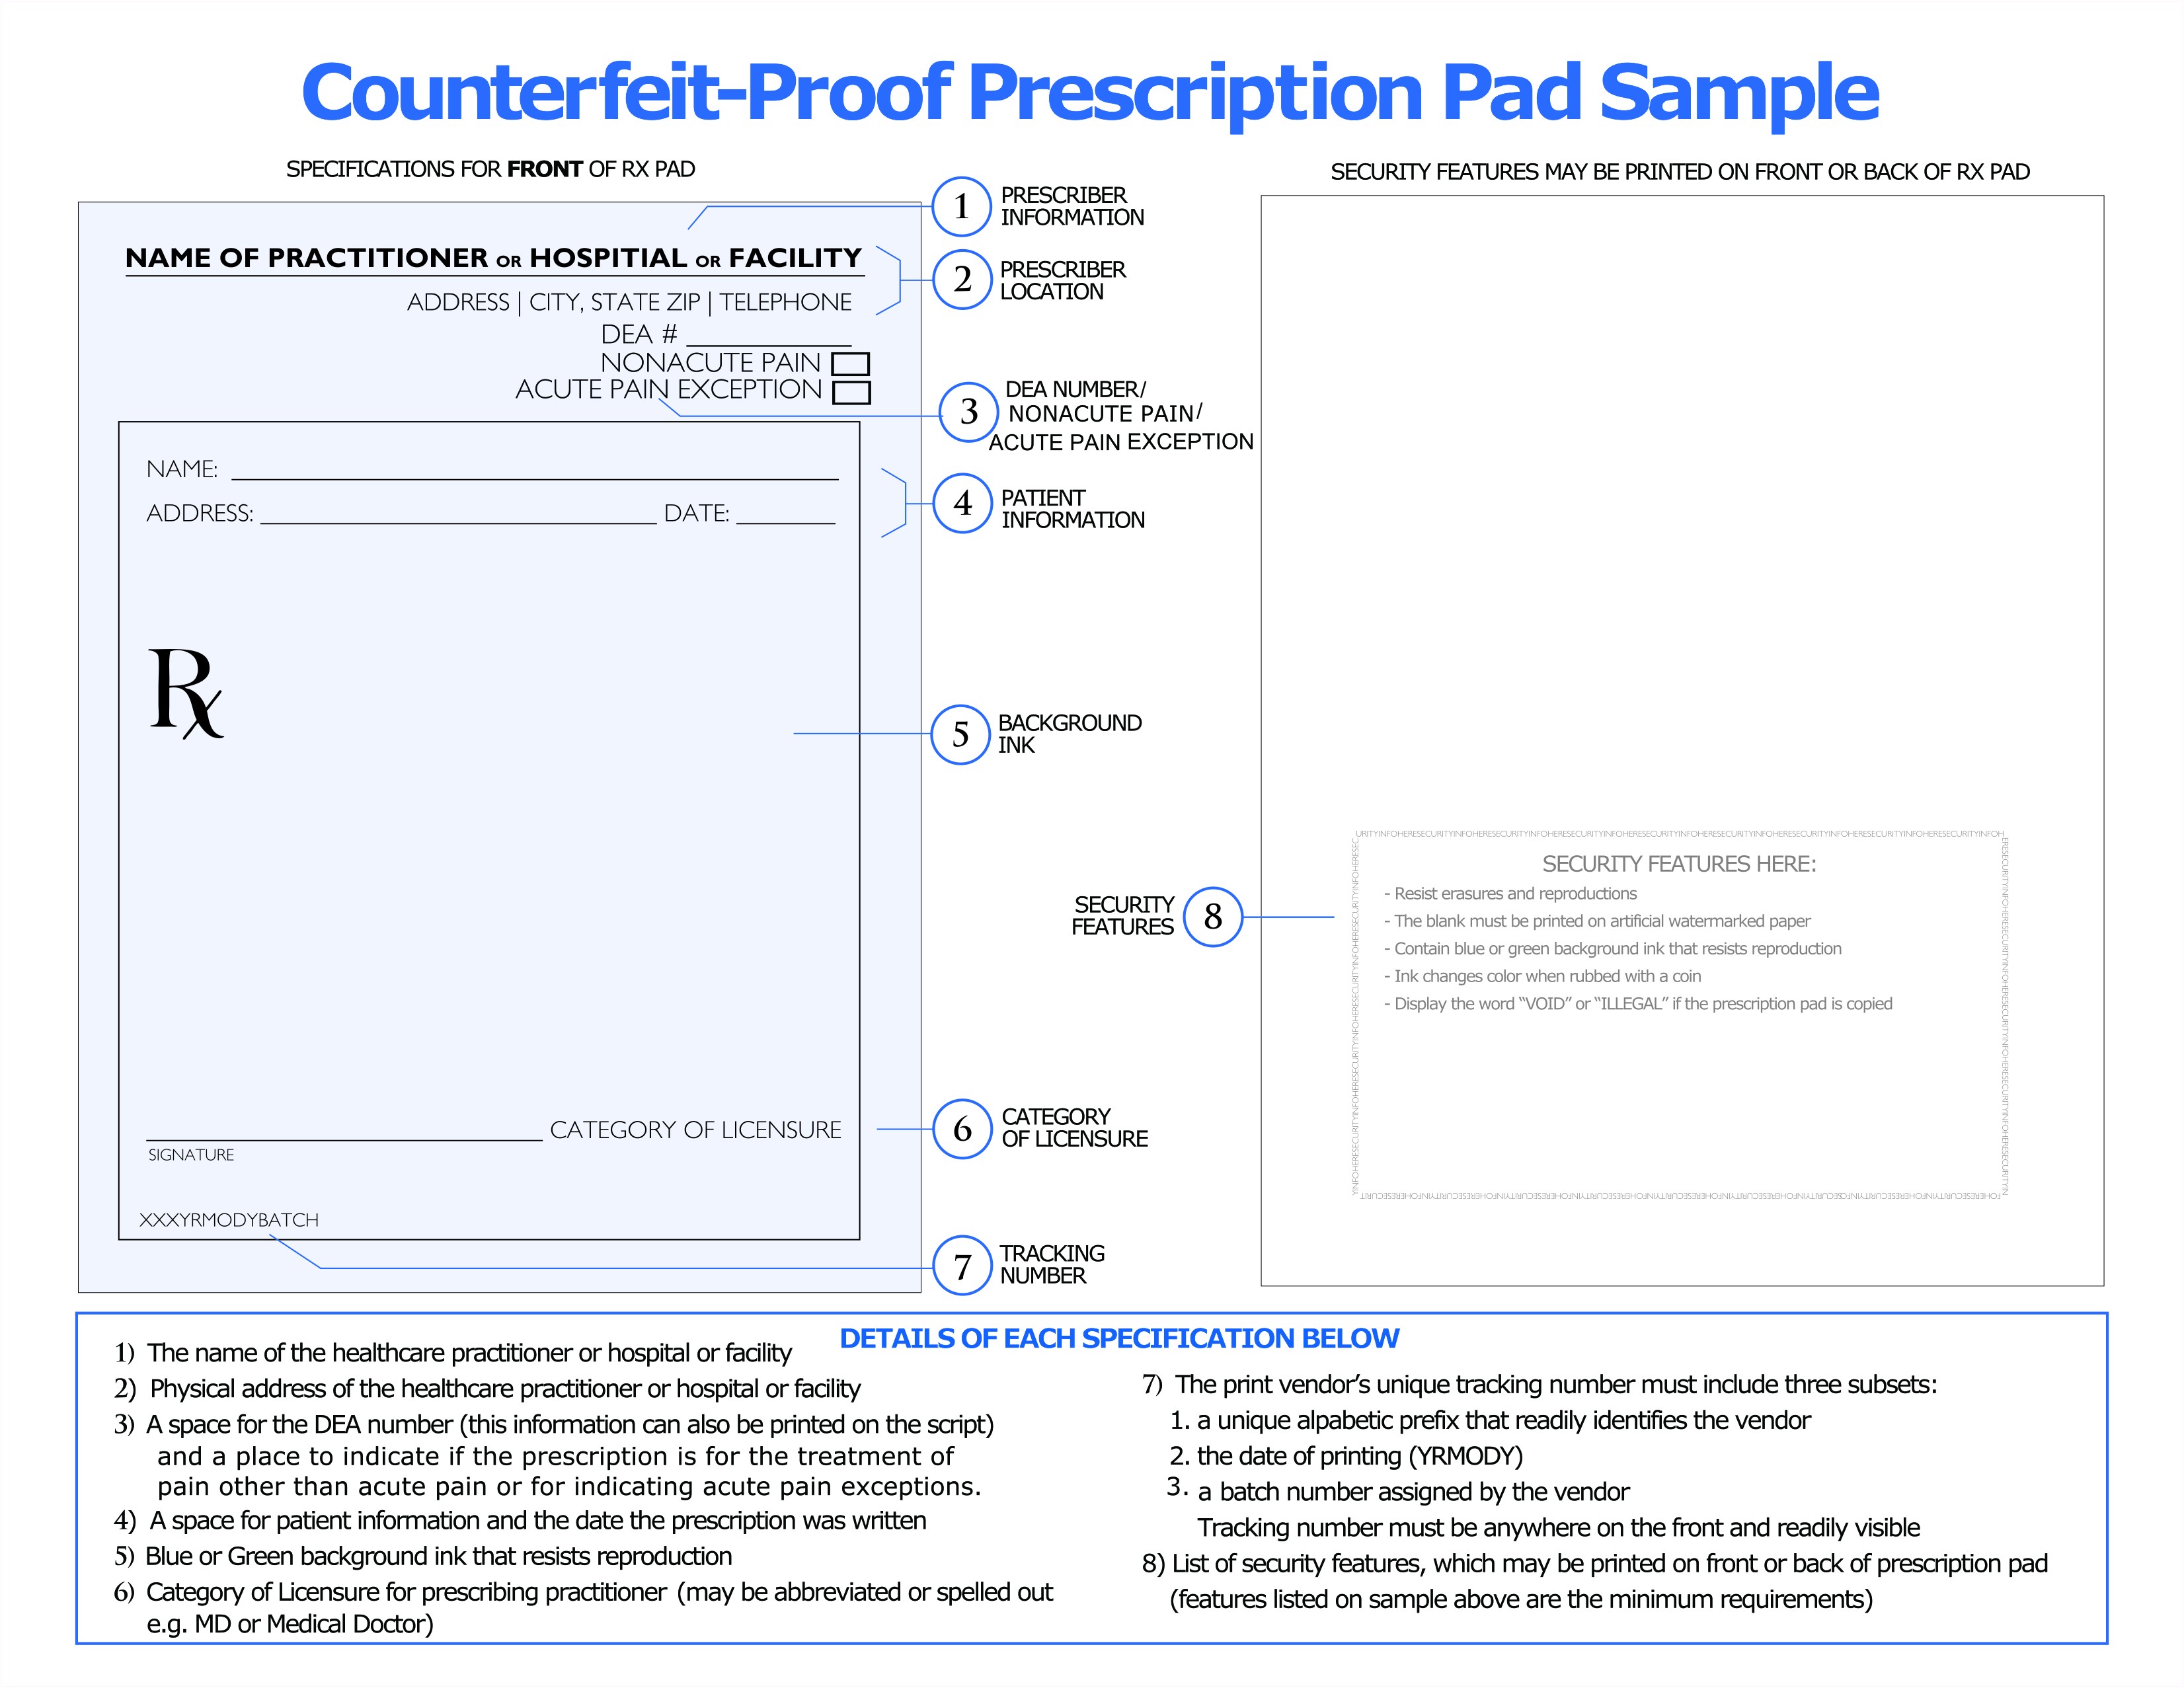 Counterfeit-Proof Rx Pads